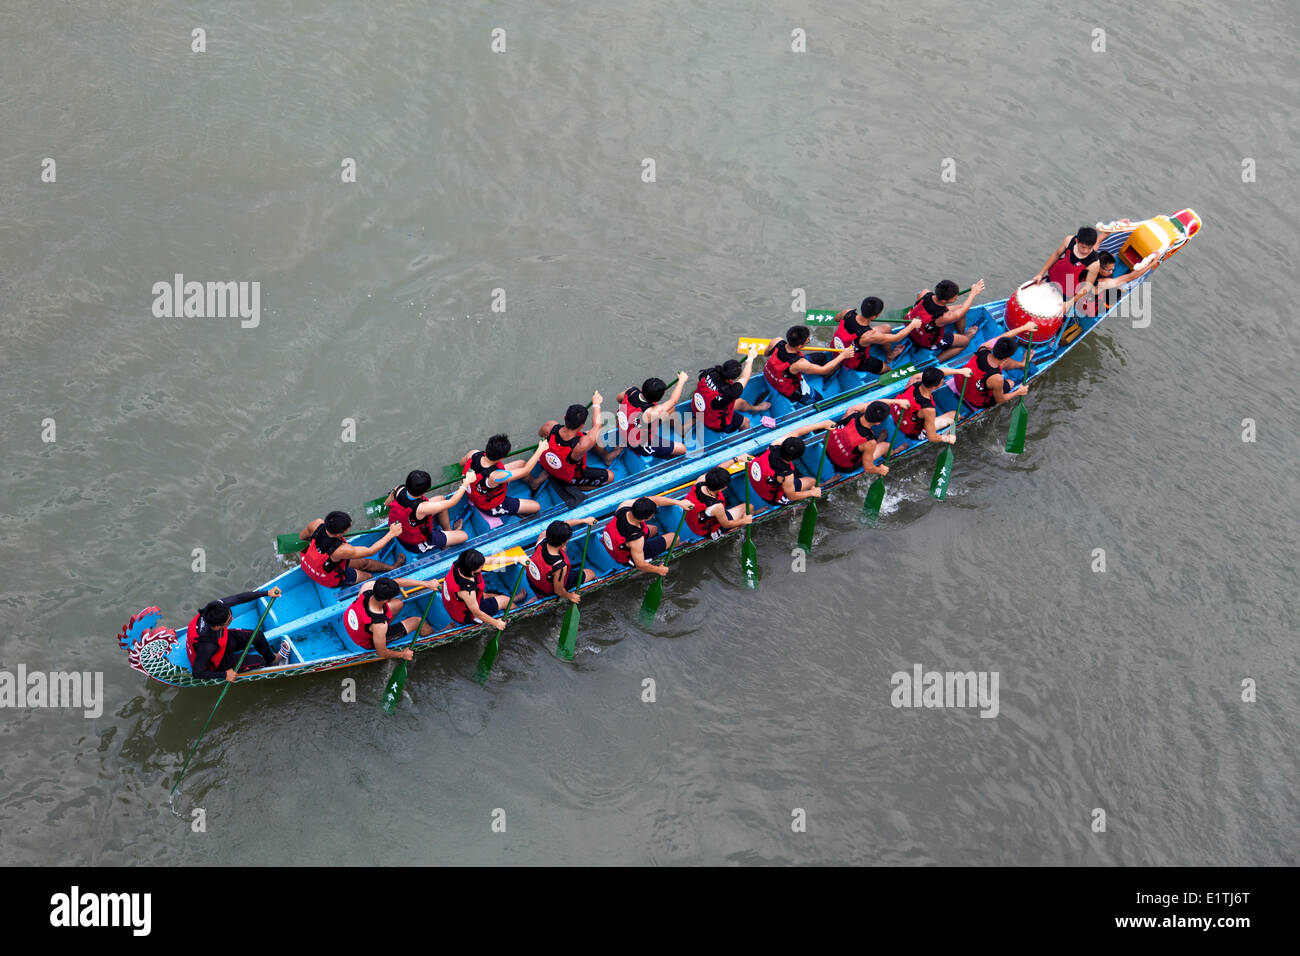 A competing team paddles to the starting line at the annual Dragon Boat Festival in Taipei, Taiwan, Saturday, May 31, 2014. Dragon boat races are held across Southeast Asia for more than 2000 years to remember Chu Yuan, an ancient Chinese poet and ministe Stock Photo